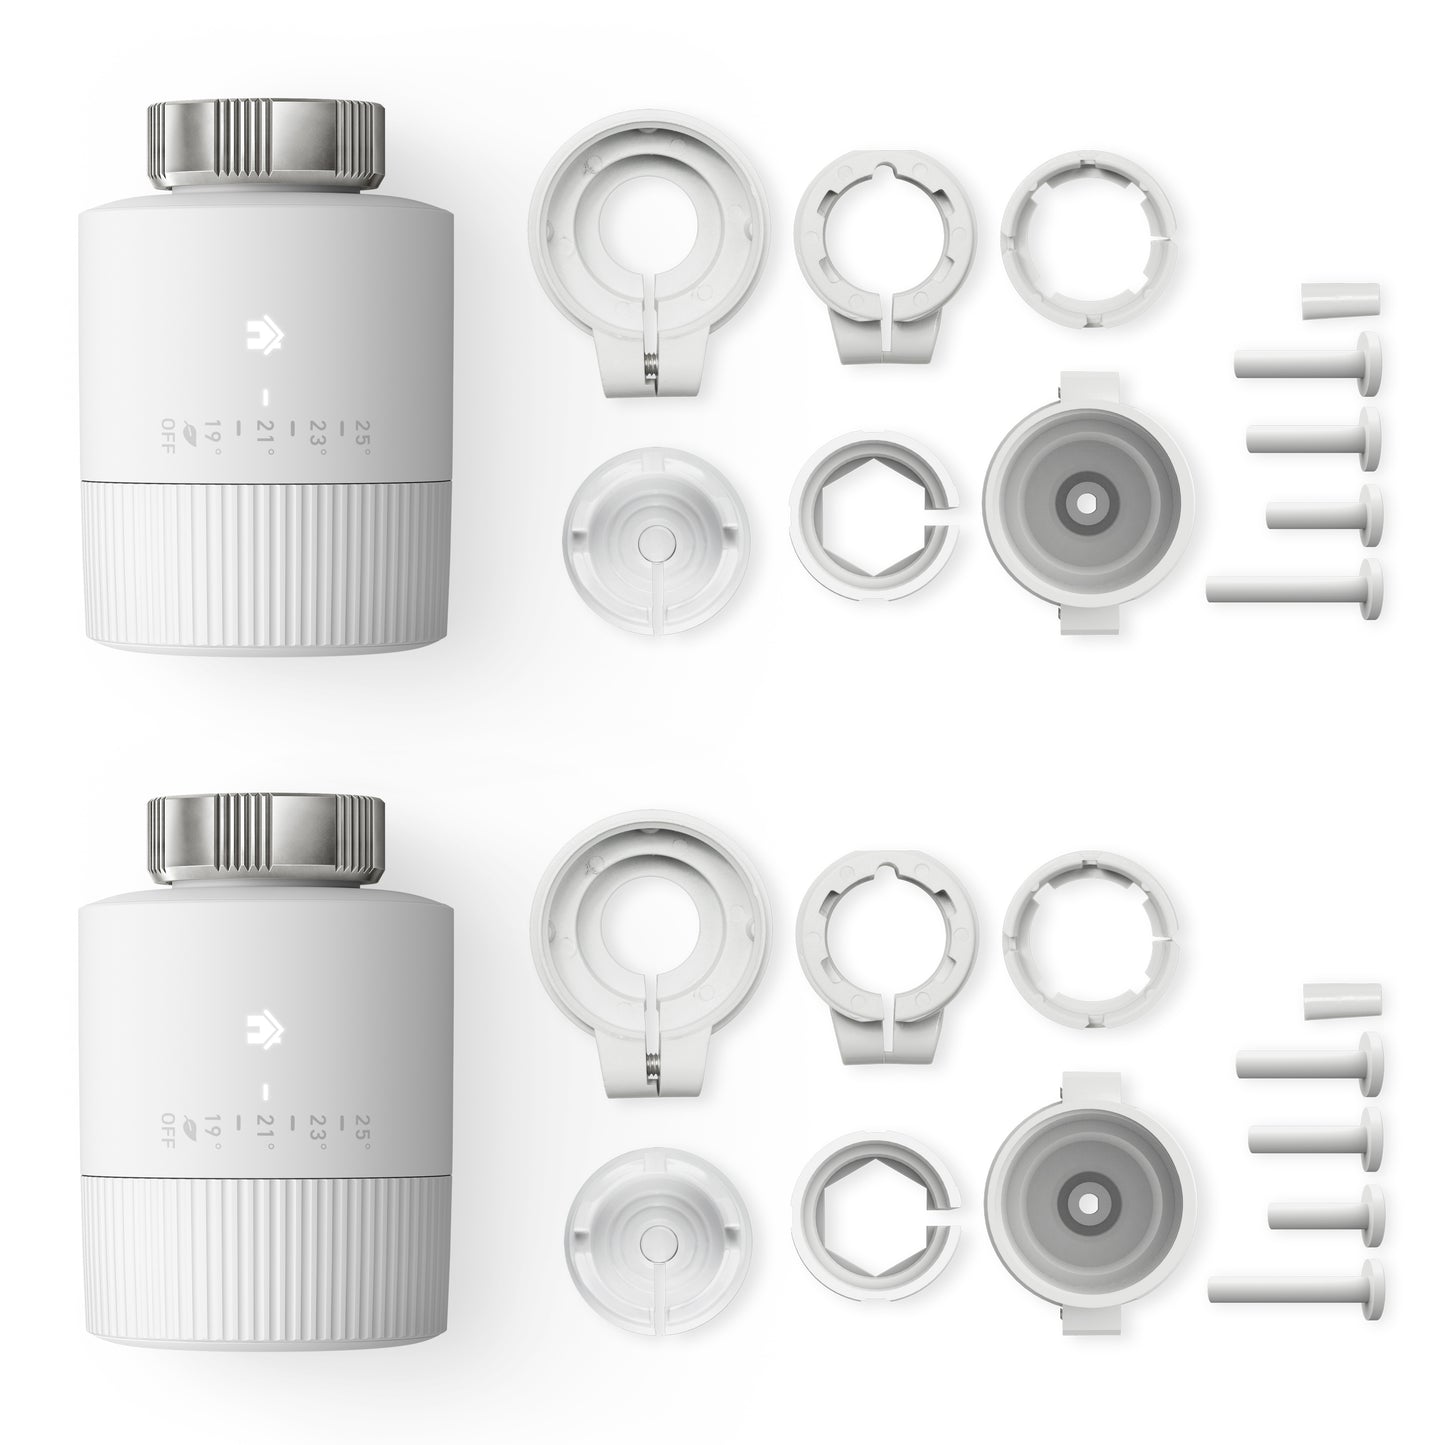 Add-on - tado° Smart Radiator Thermostat Basic - Duo Pack for Multi-Room Control